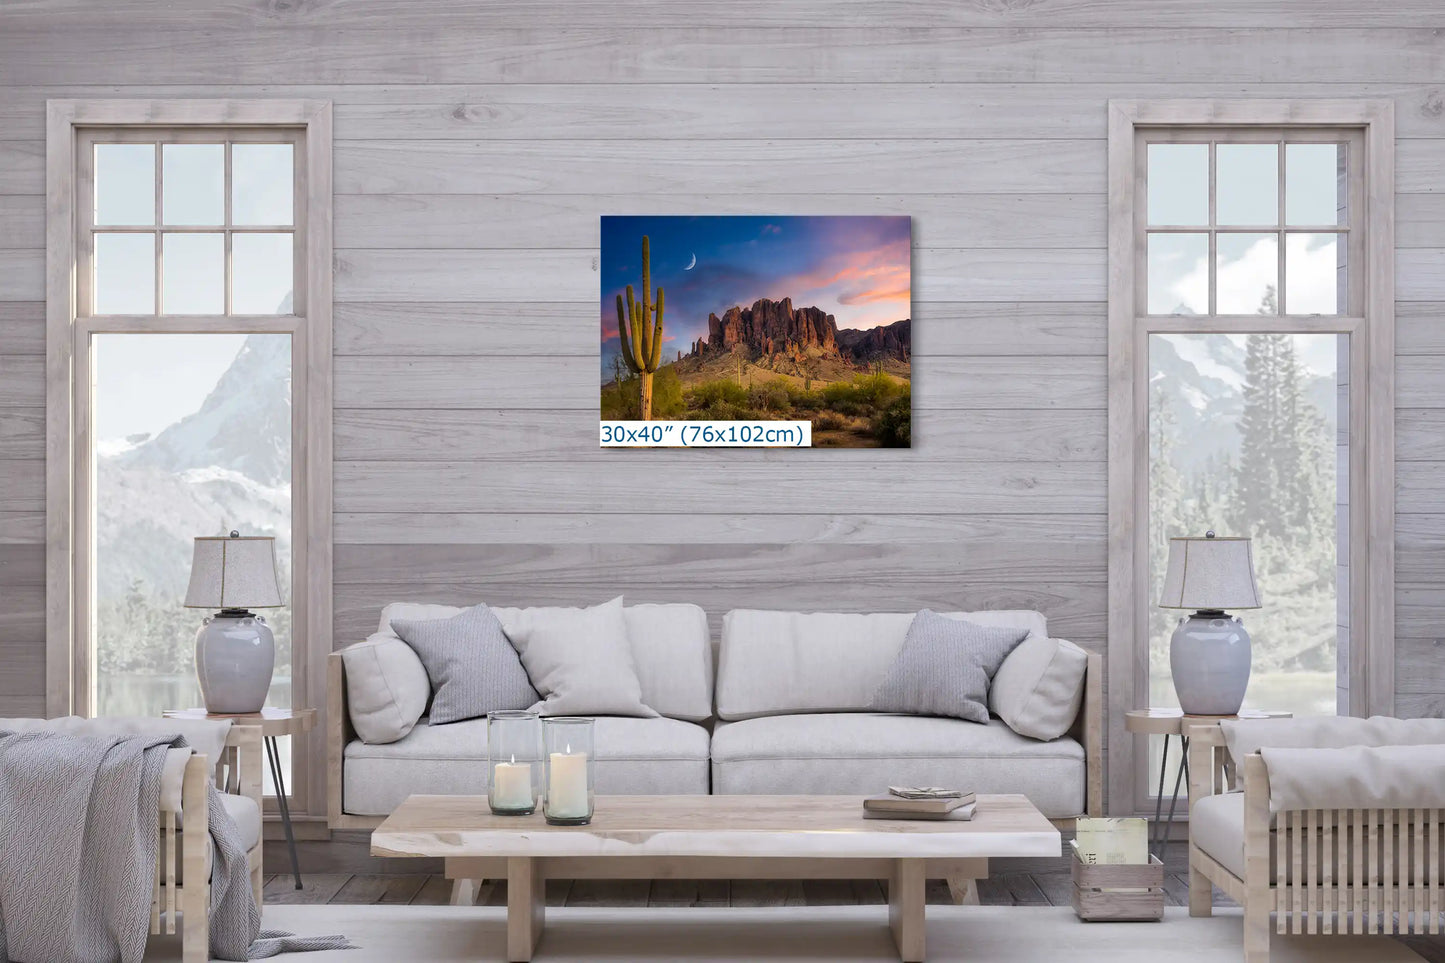 A 30x40 canvas art of a Saguaro Cactus Sunset at Superstition Mountains, Arizona, commanding attention in a cozy living room.